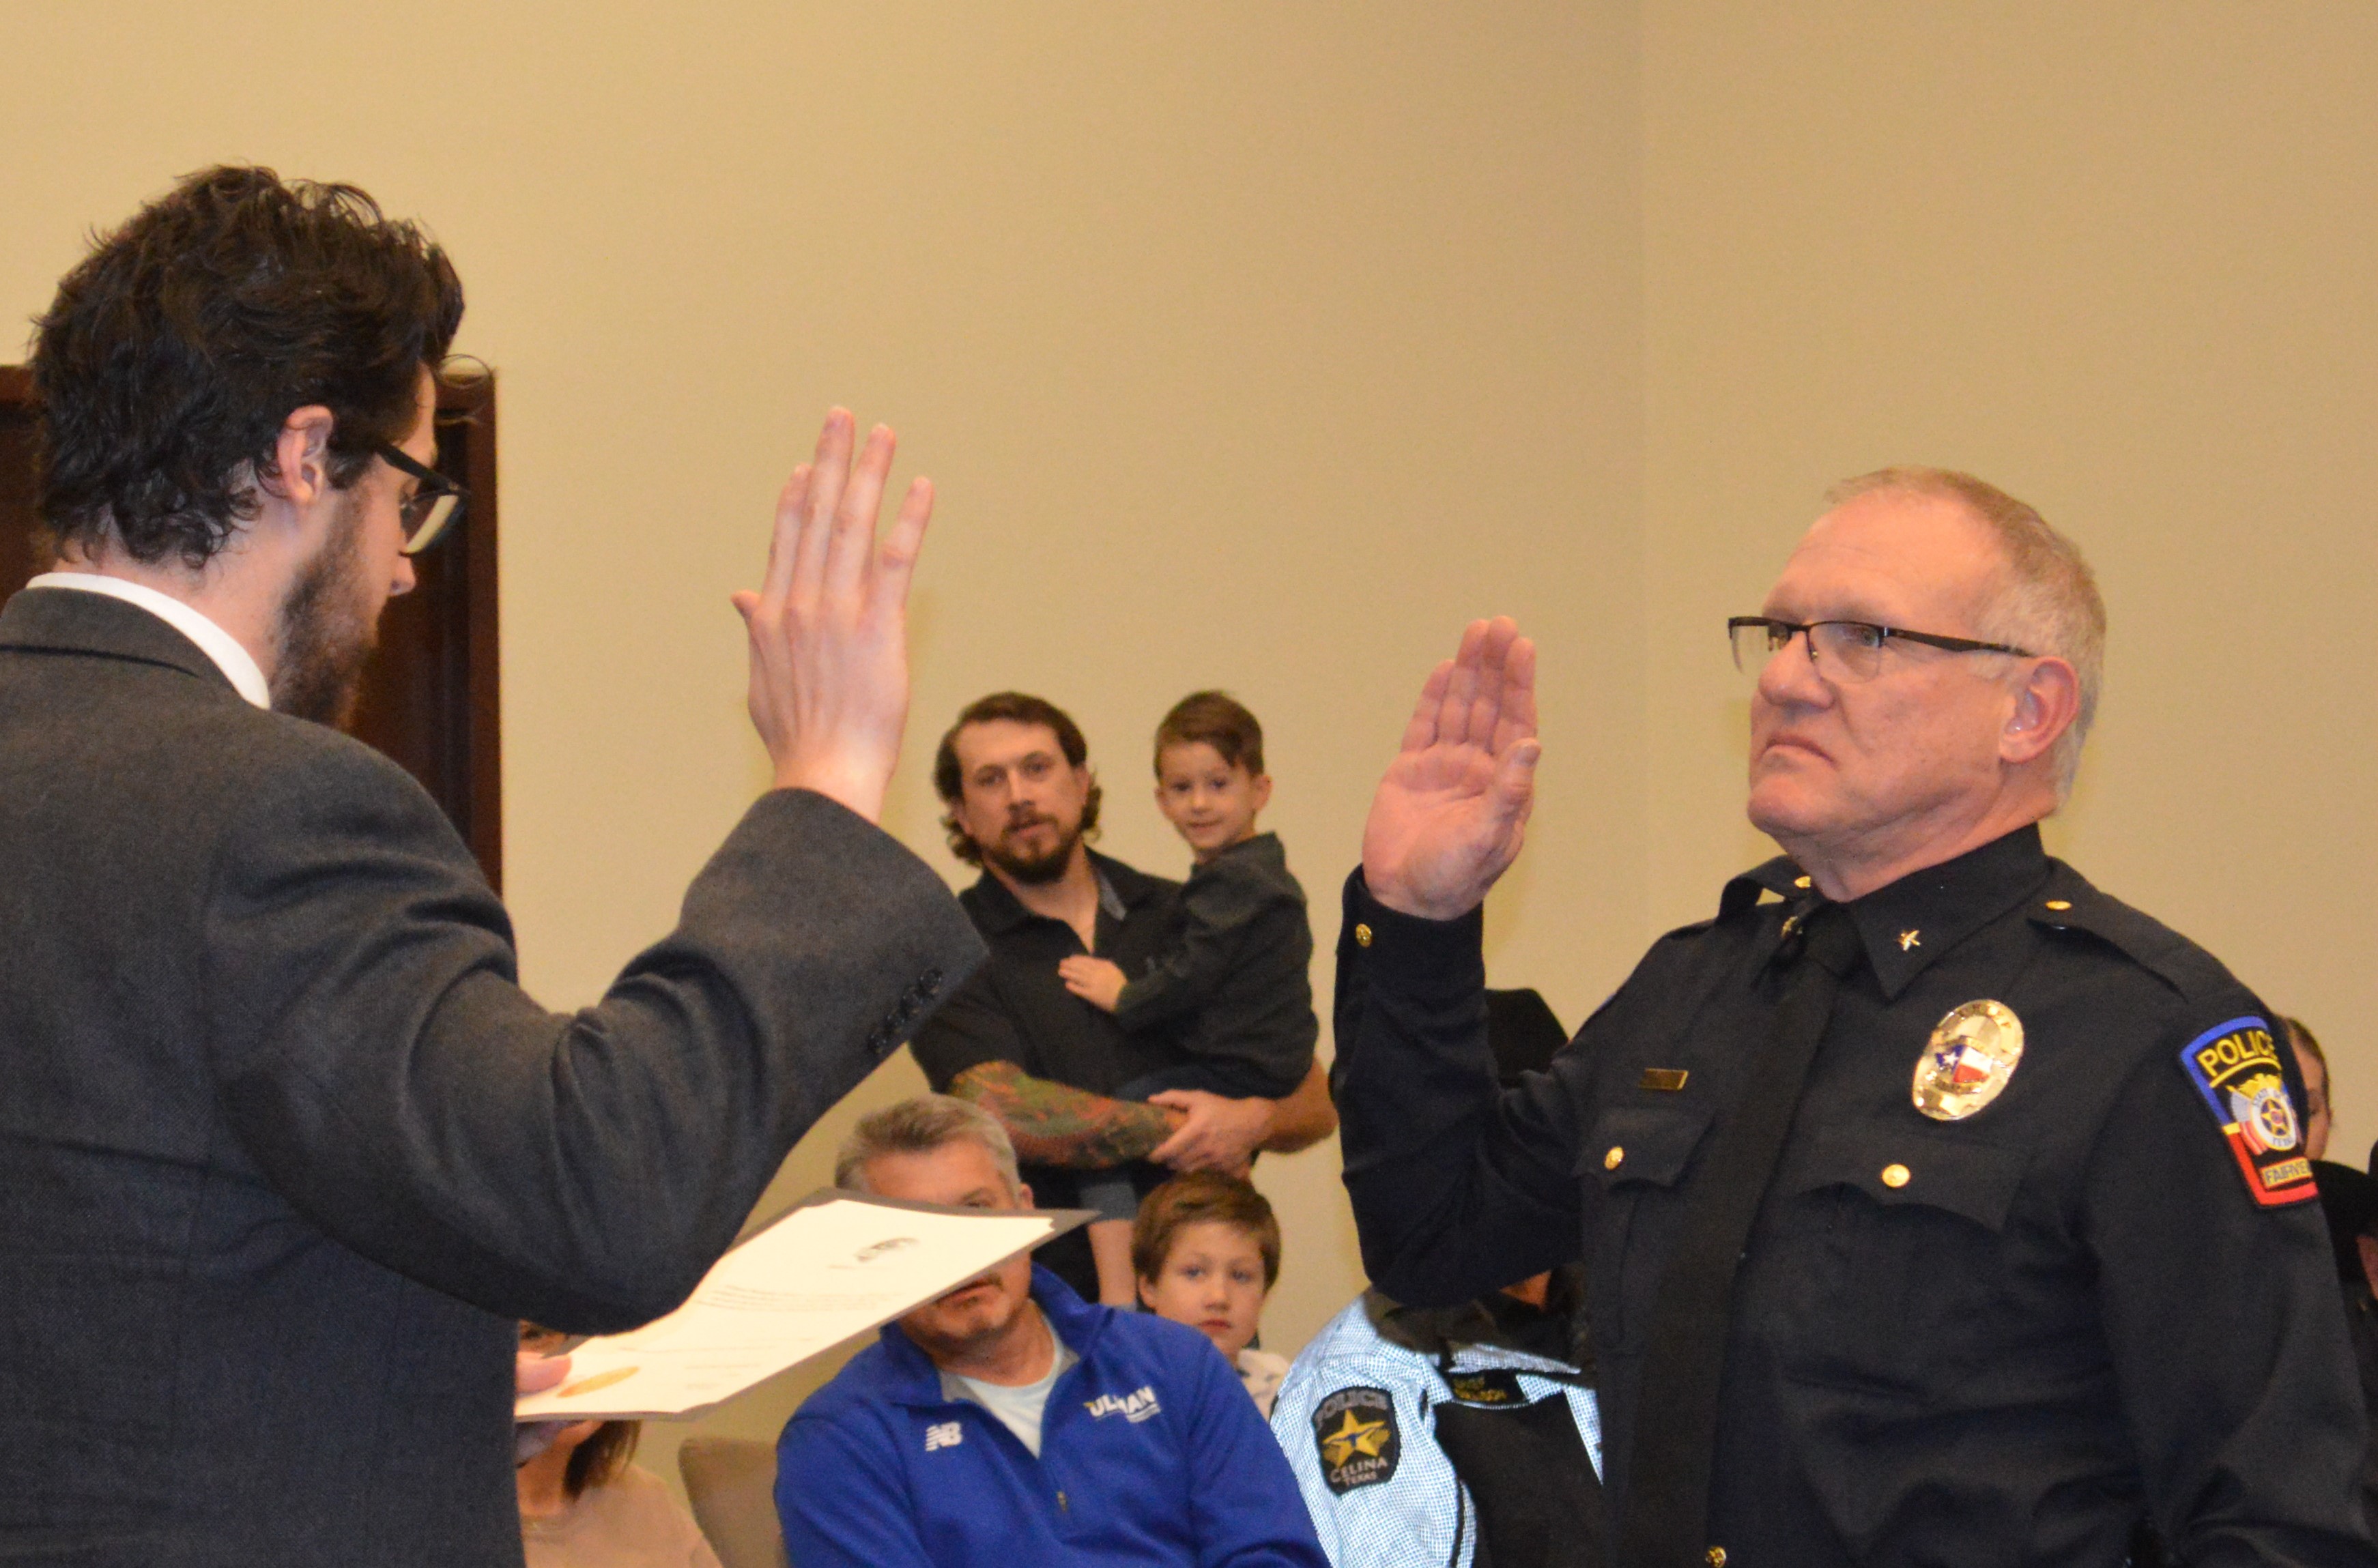 Chief Chandler swearing in